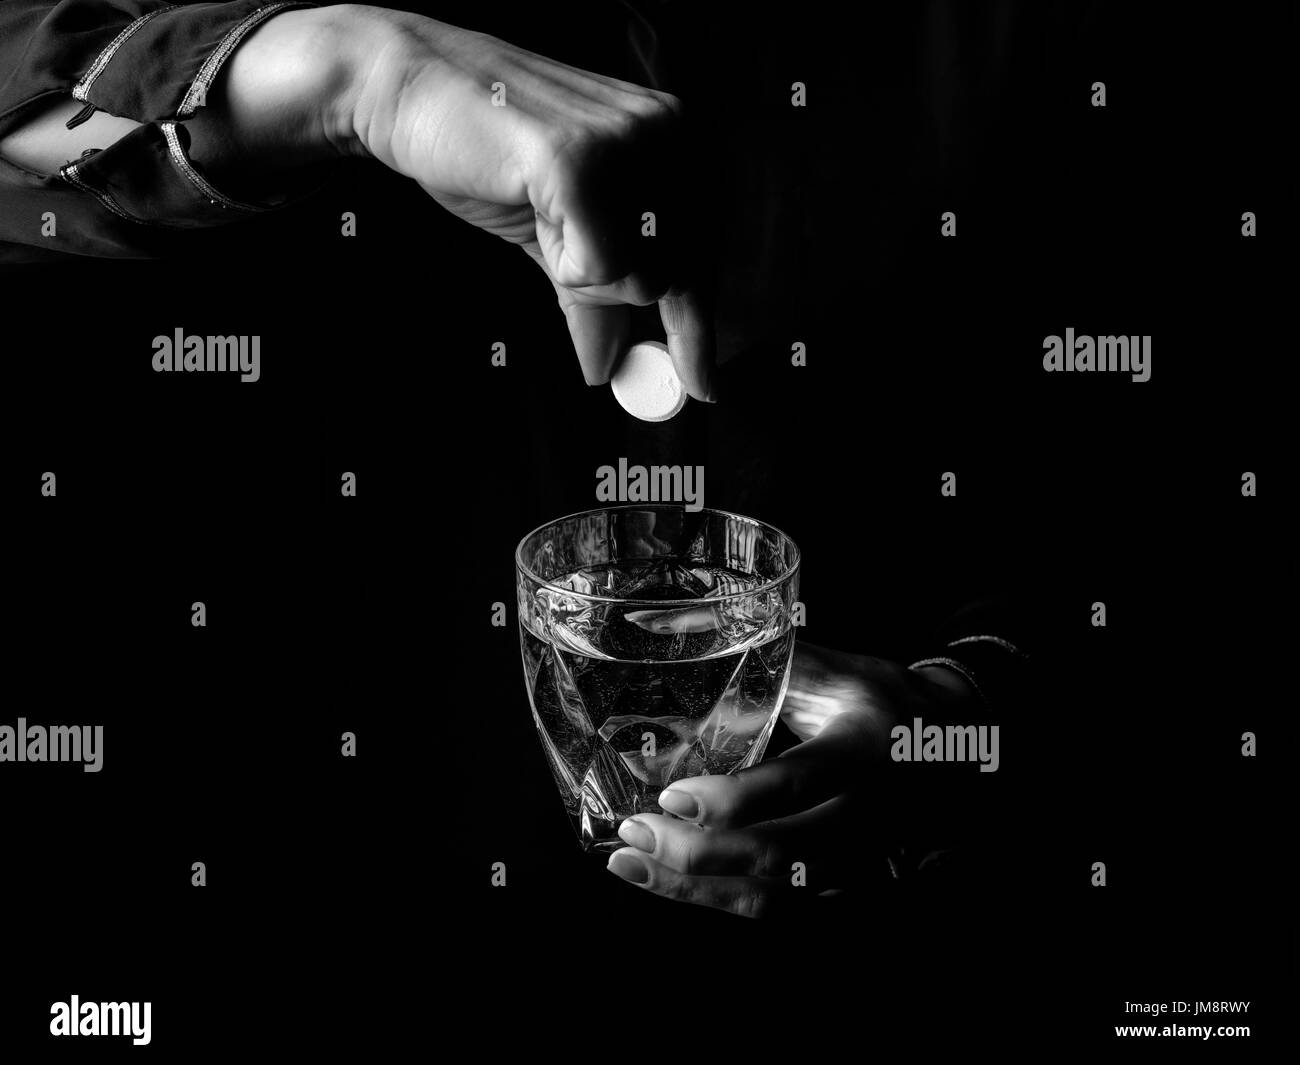 Black Mania. female hands isolated on black background showing effervescent tablet and glass of water Stock Photo